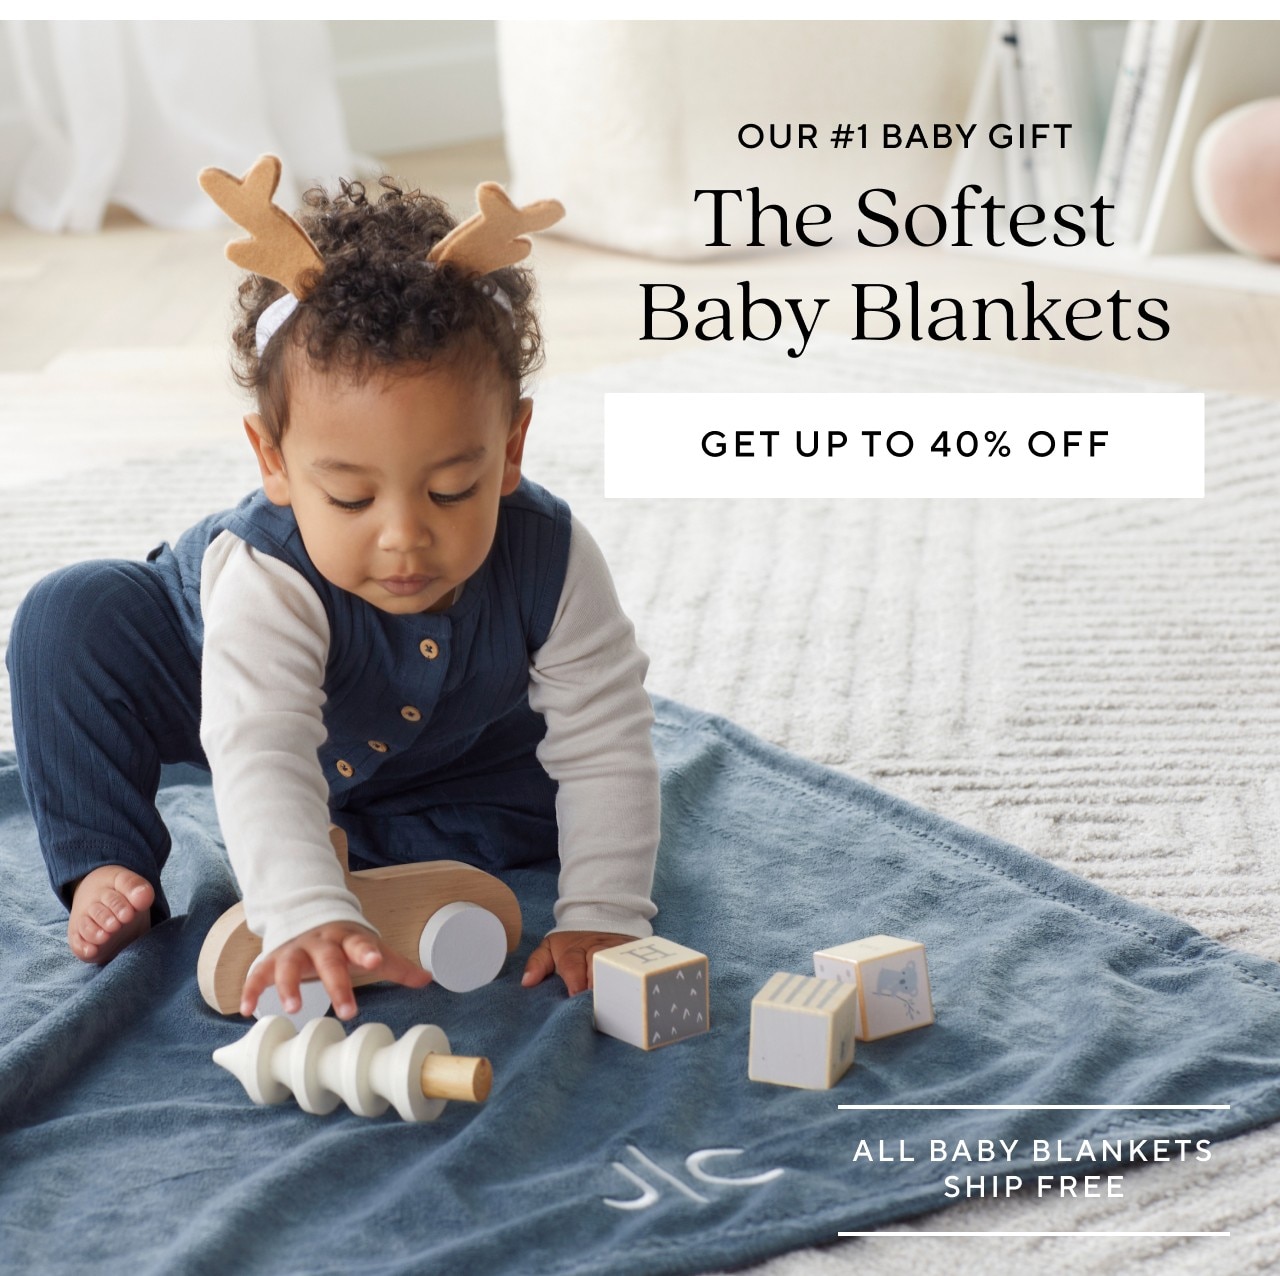 THE SOFTEST BABY BLANKETS - GET UP TO 40% OFF